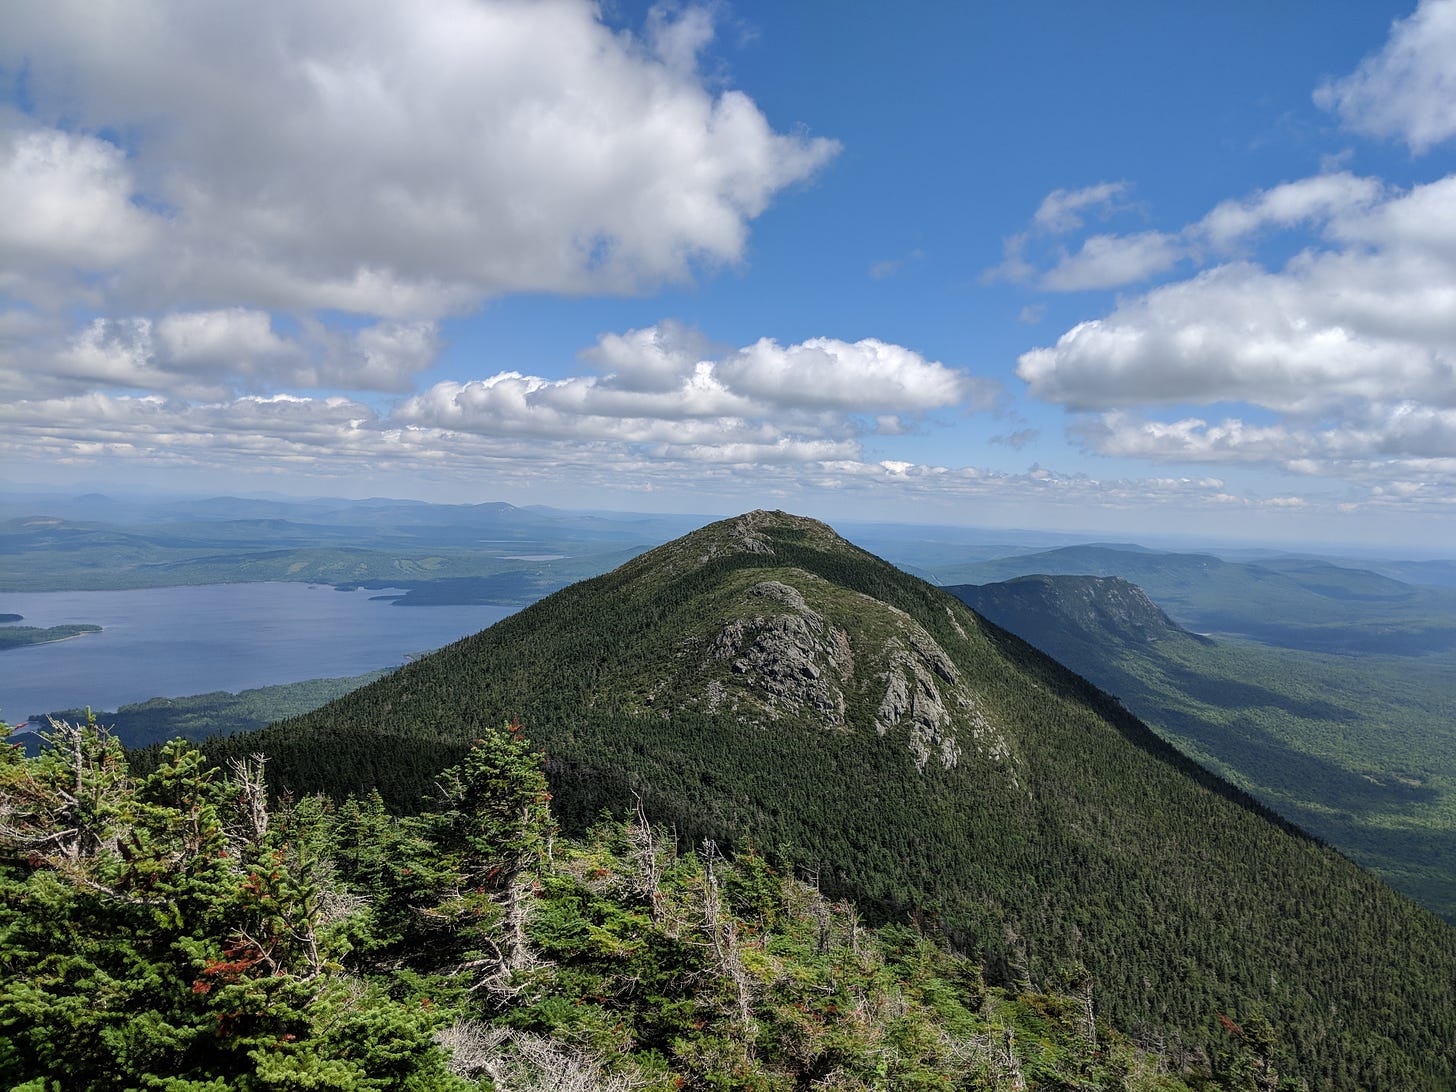 Photo of Avery Peak in the Bigelow Mountains of Maine, taken while standing on West Peak. The sky is blue and full of puffy clouds, and Flagstaff Lake sits to the left behind Avery Peak.